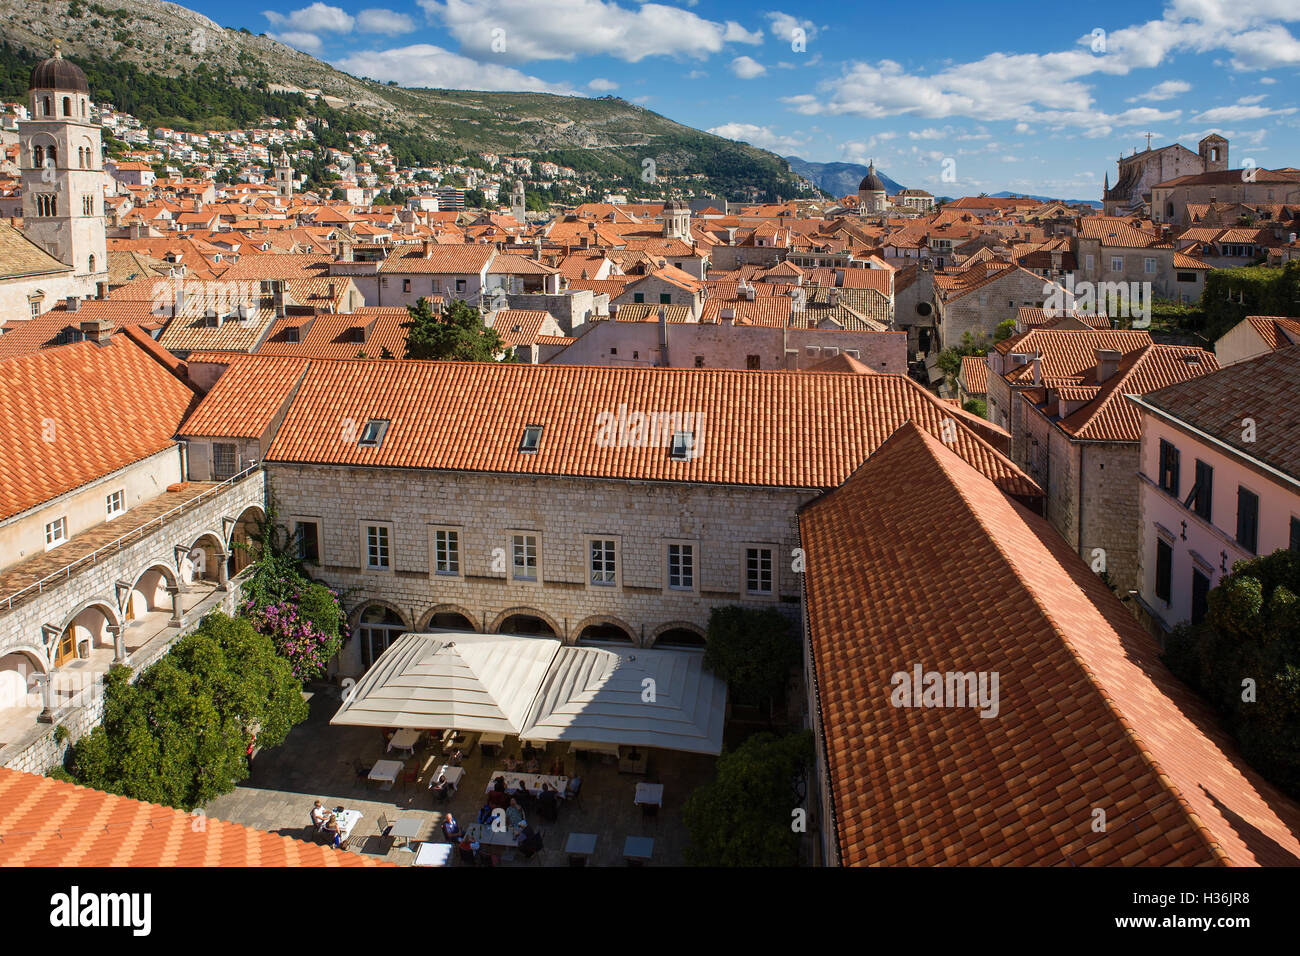 St. Claire's Convent and the roofs of old town (stari grad), from the city walls above Za Rokom, Dubrovnik, Croatia Stock Photo